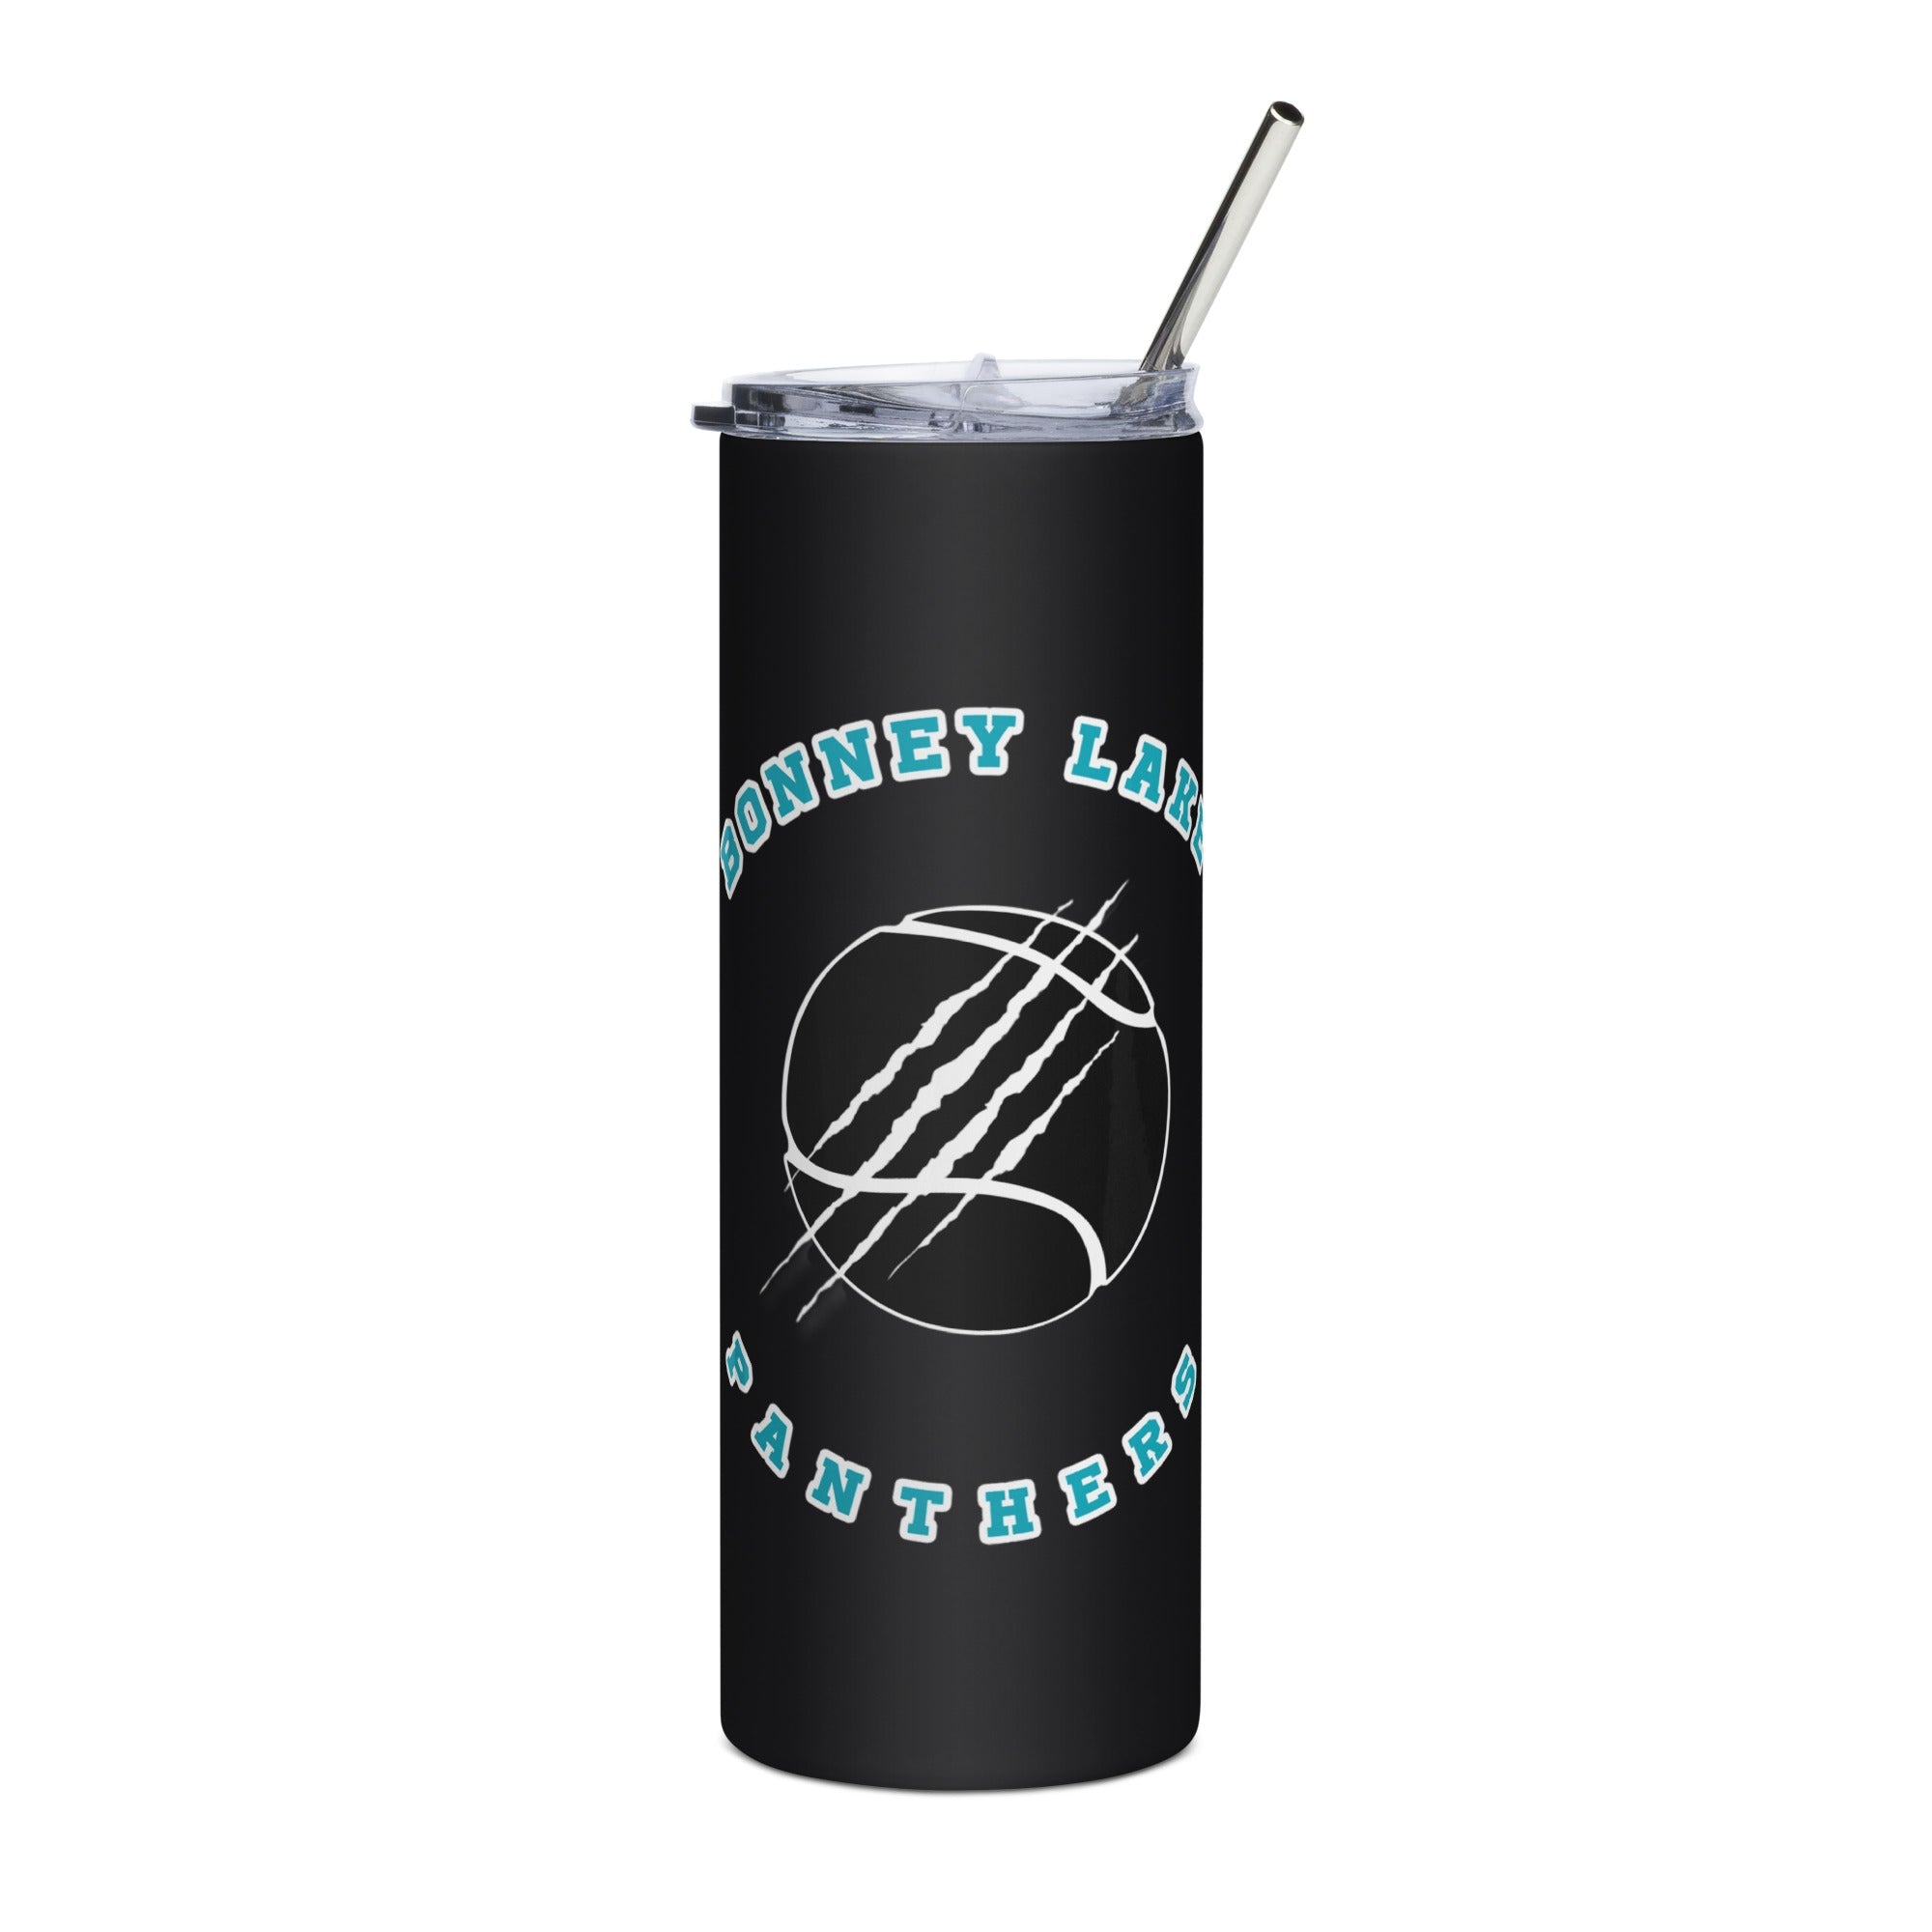 BLHT Stainless steel tumbler